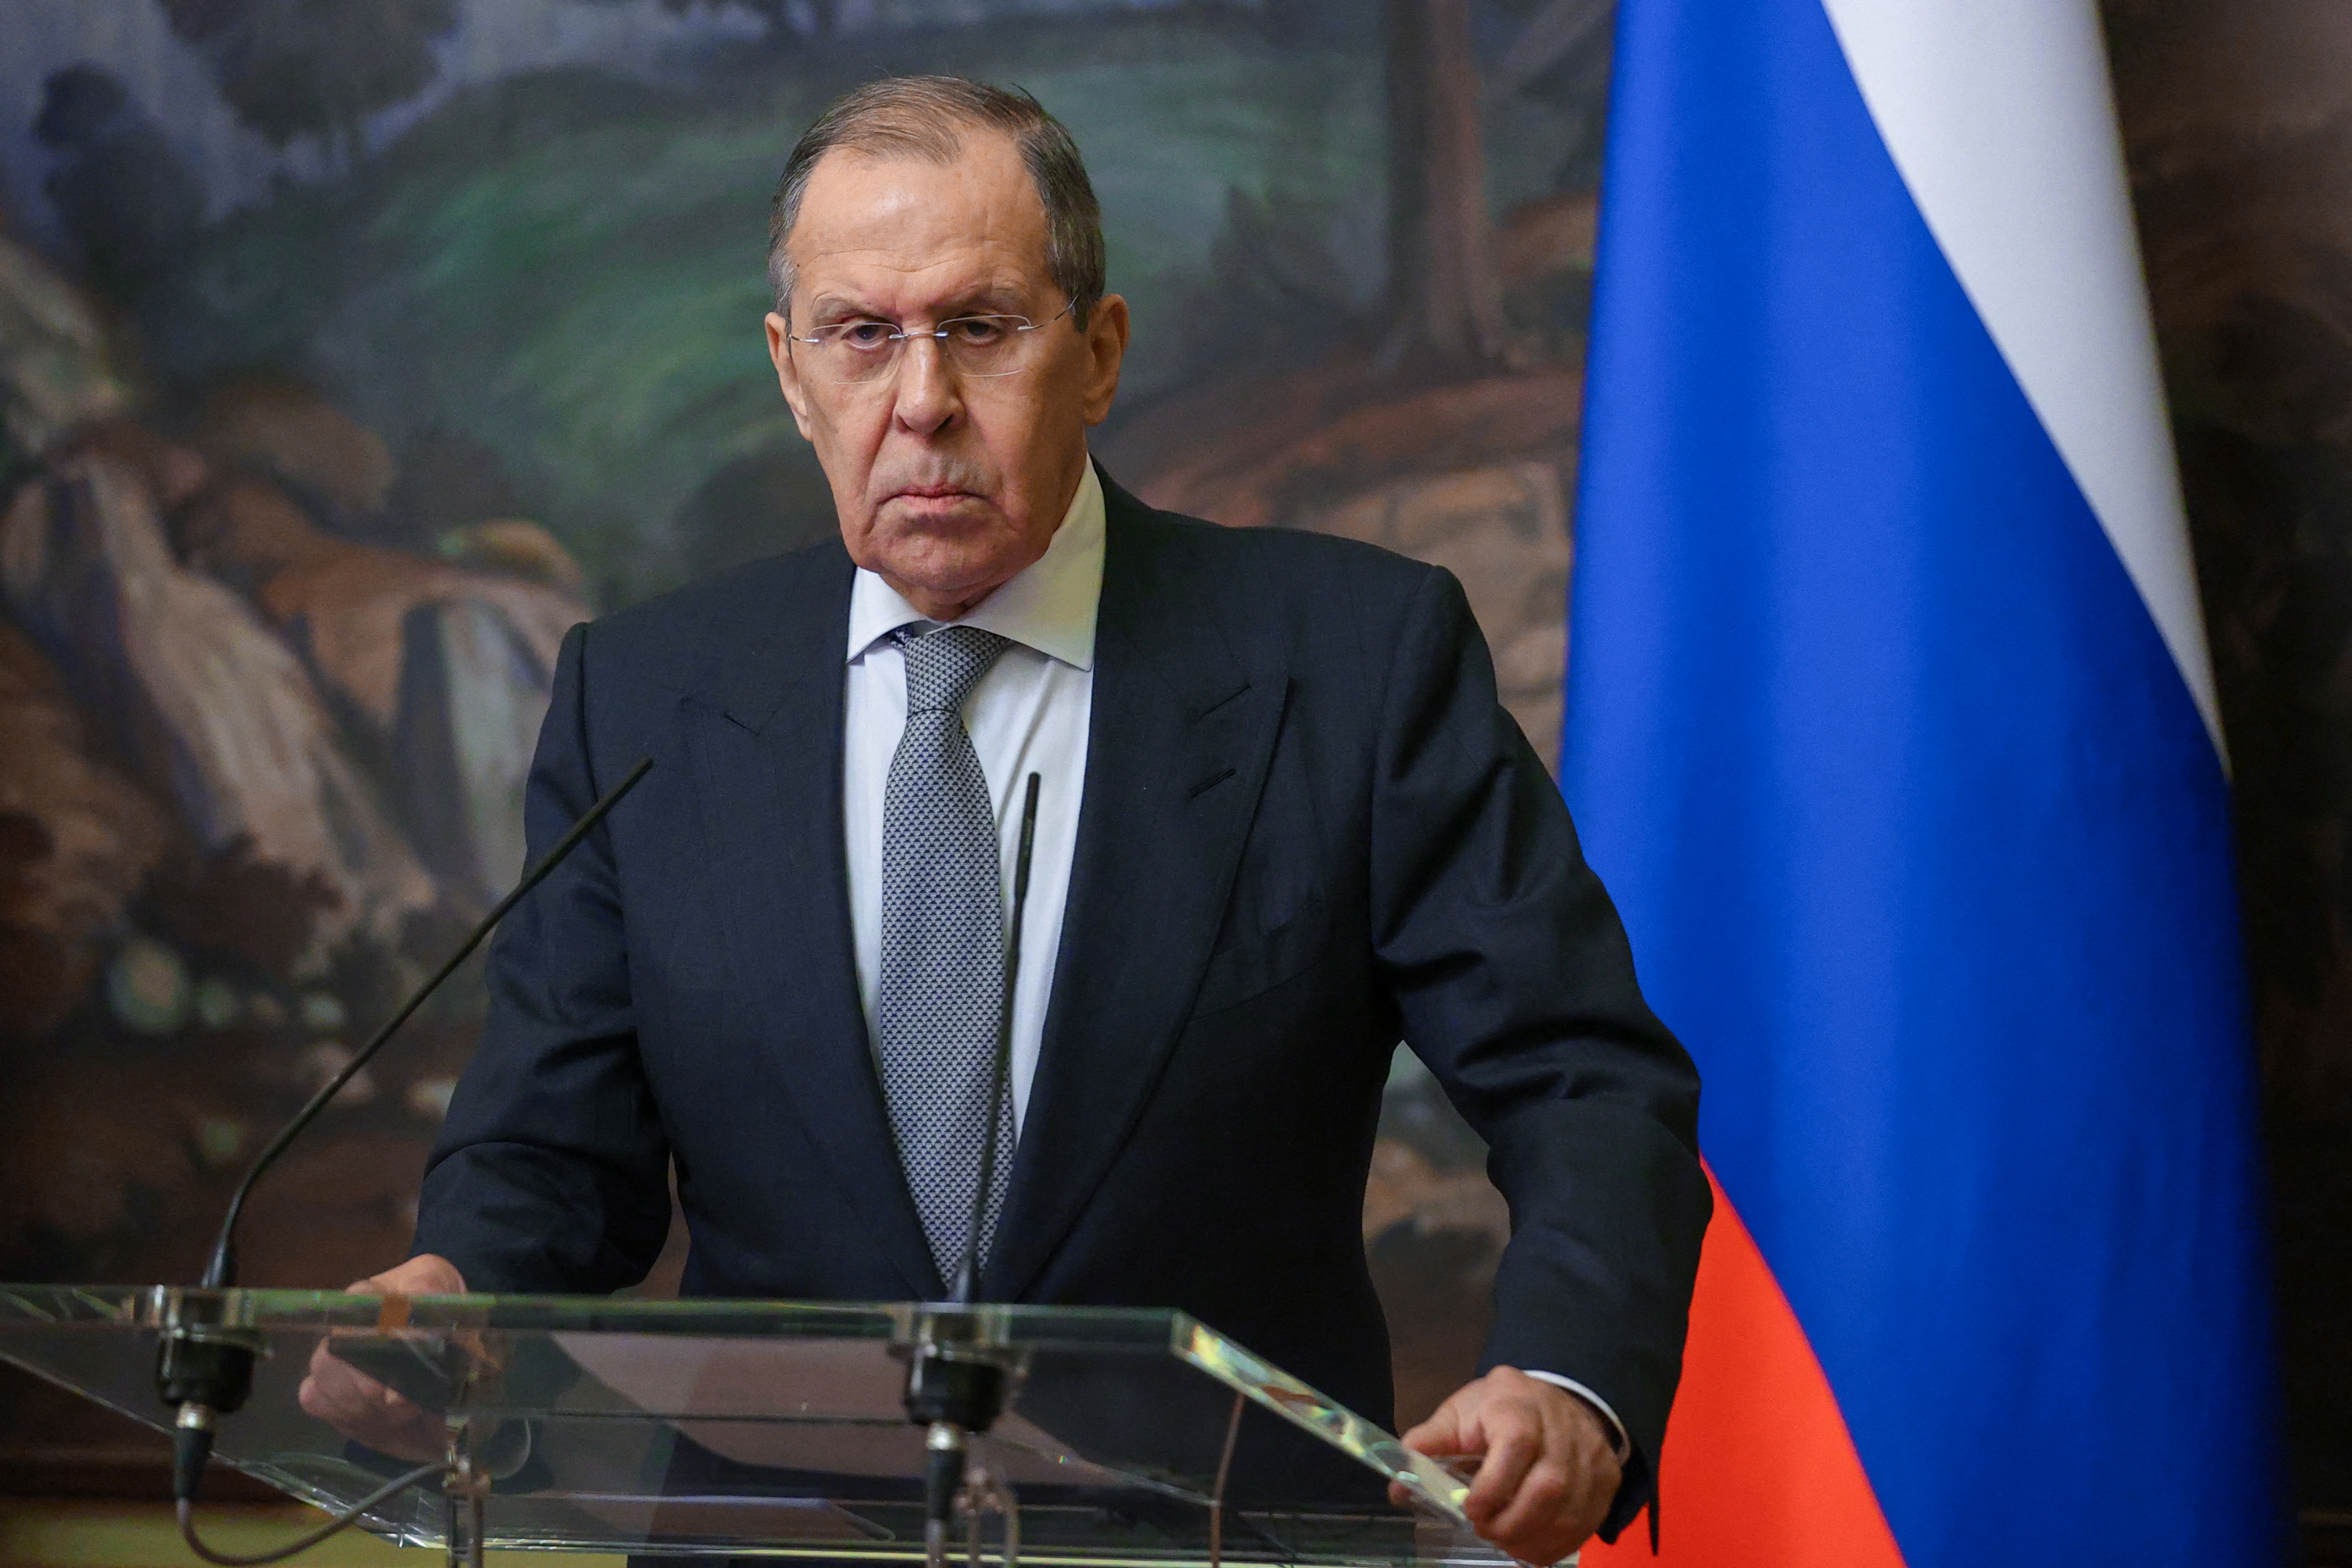 Russia's Foreign Minister Sergei Lavrov and Syria's Foreign Minister Faisal Mekdad attend a news conference in Moscow